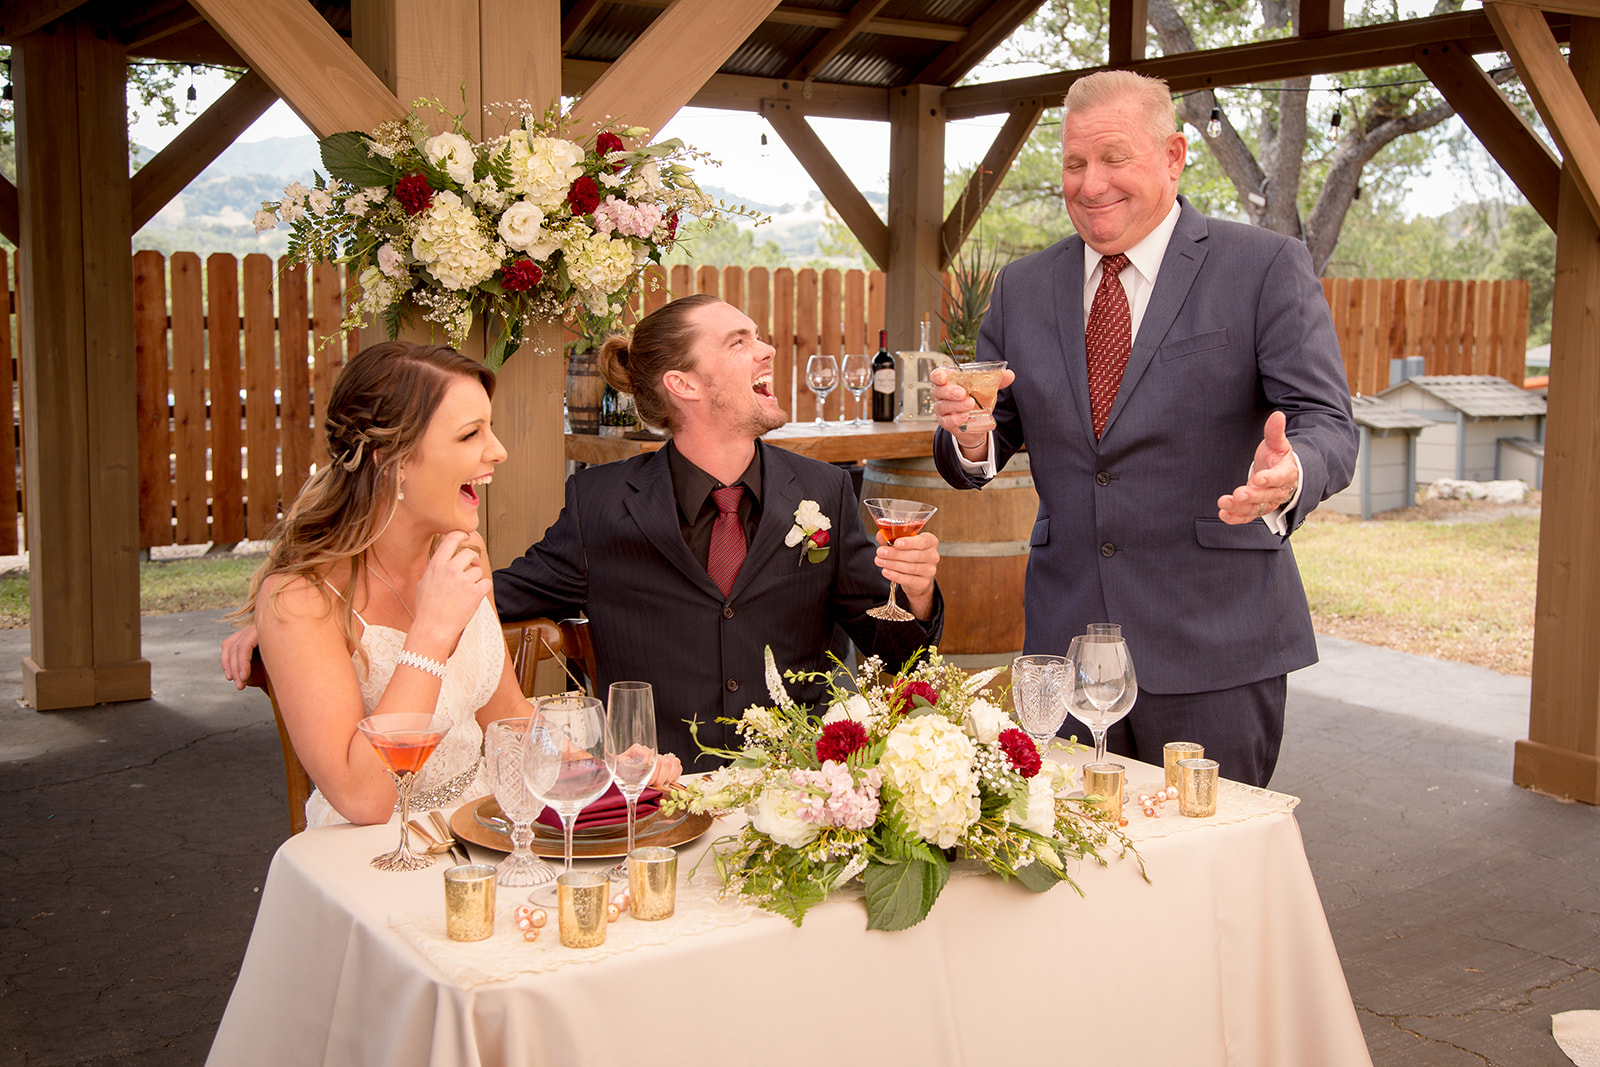 Sweetheart table at intimate wedding in San Luis Obispo County.